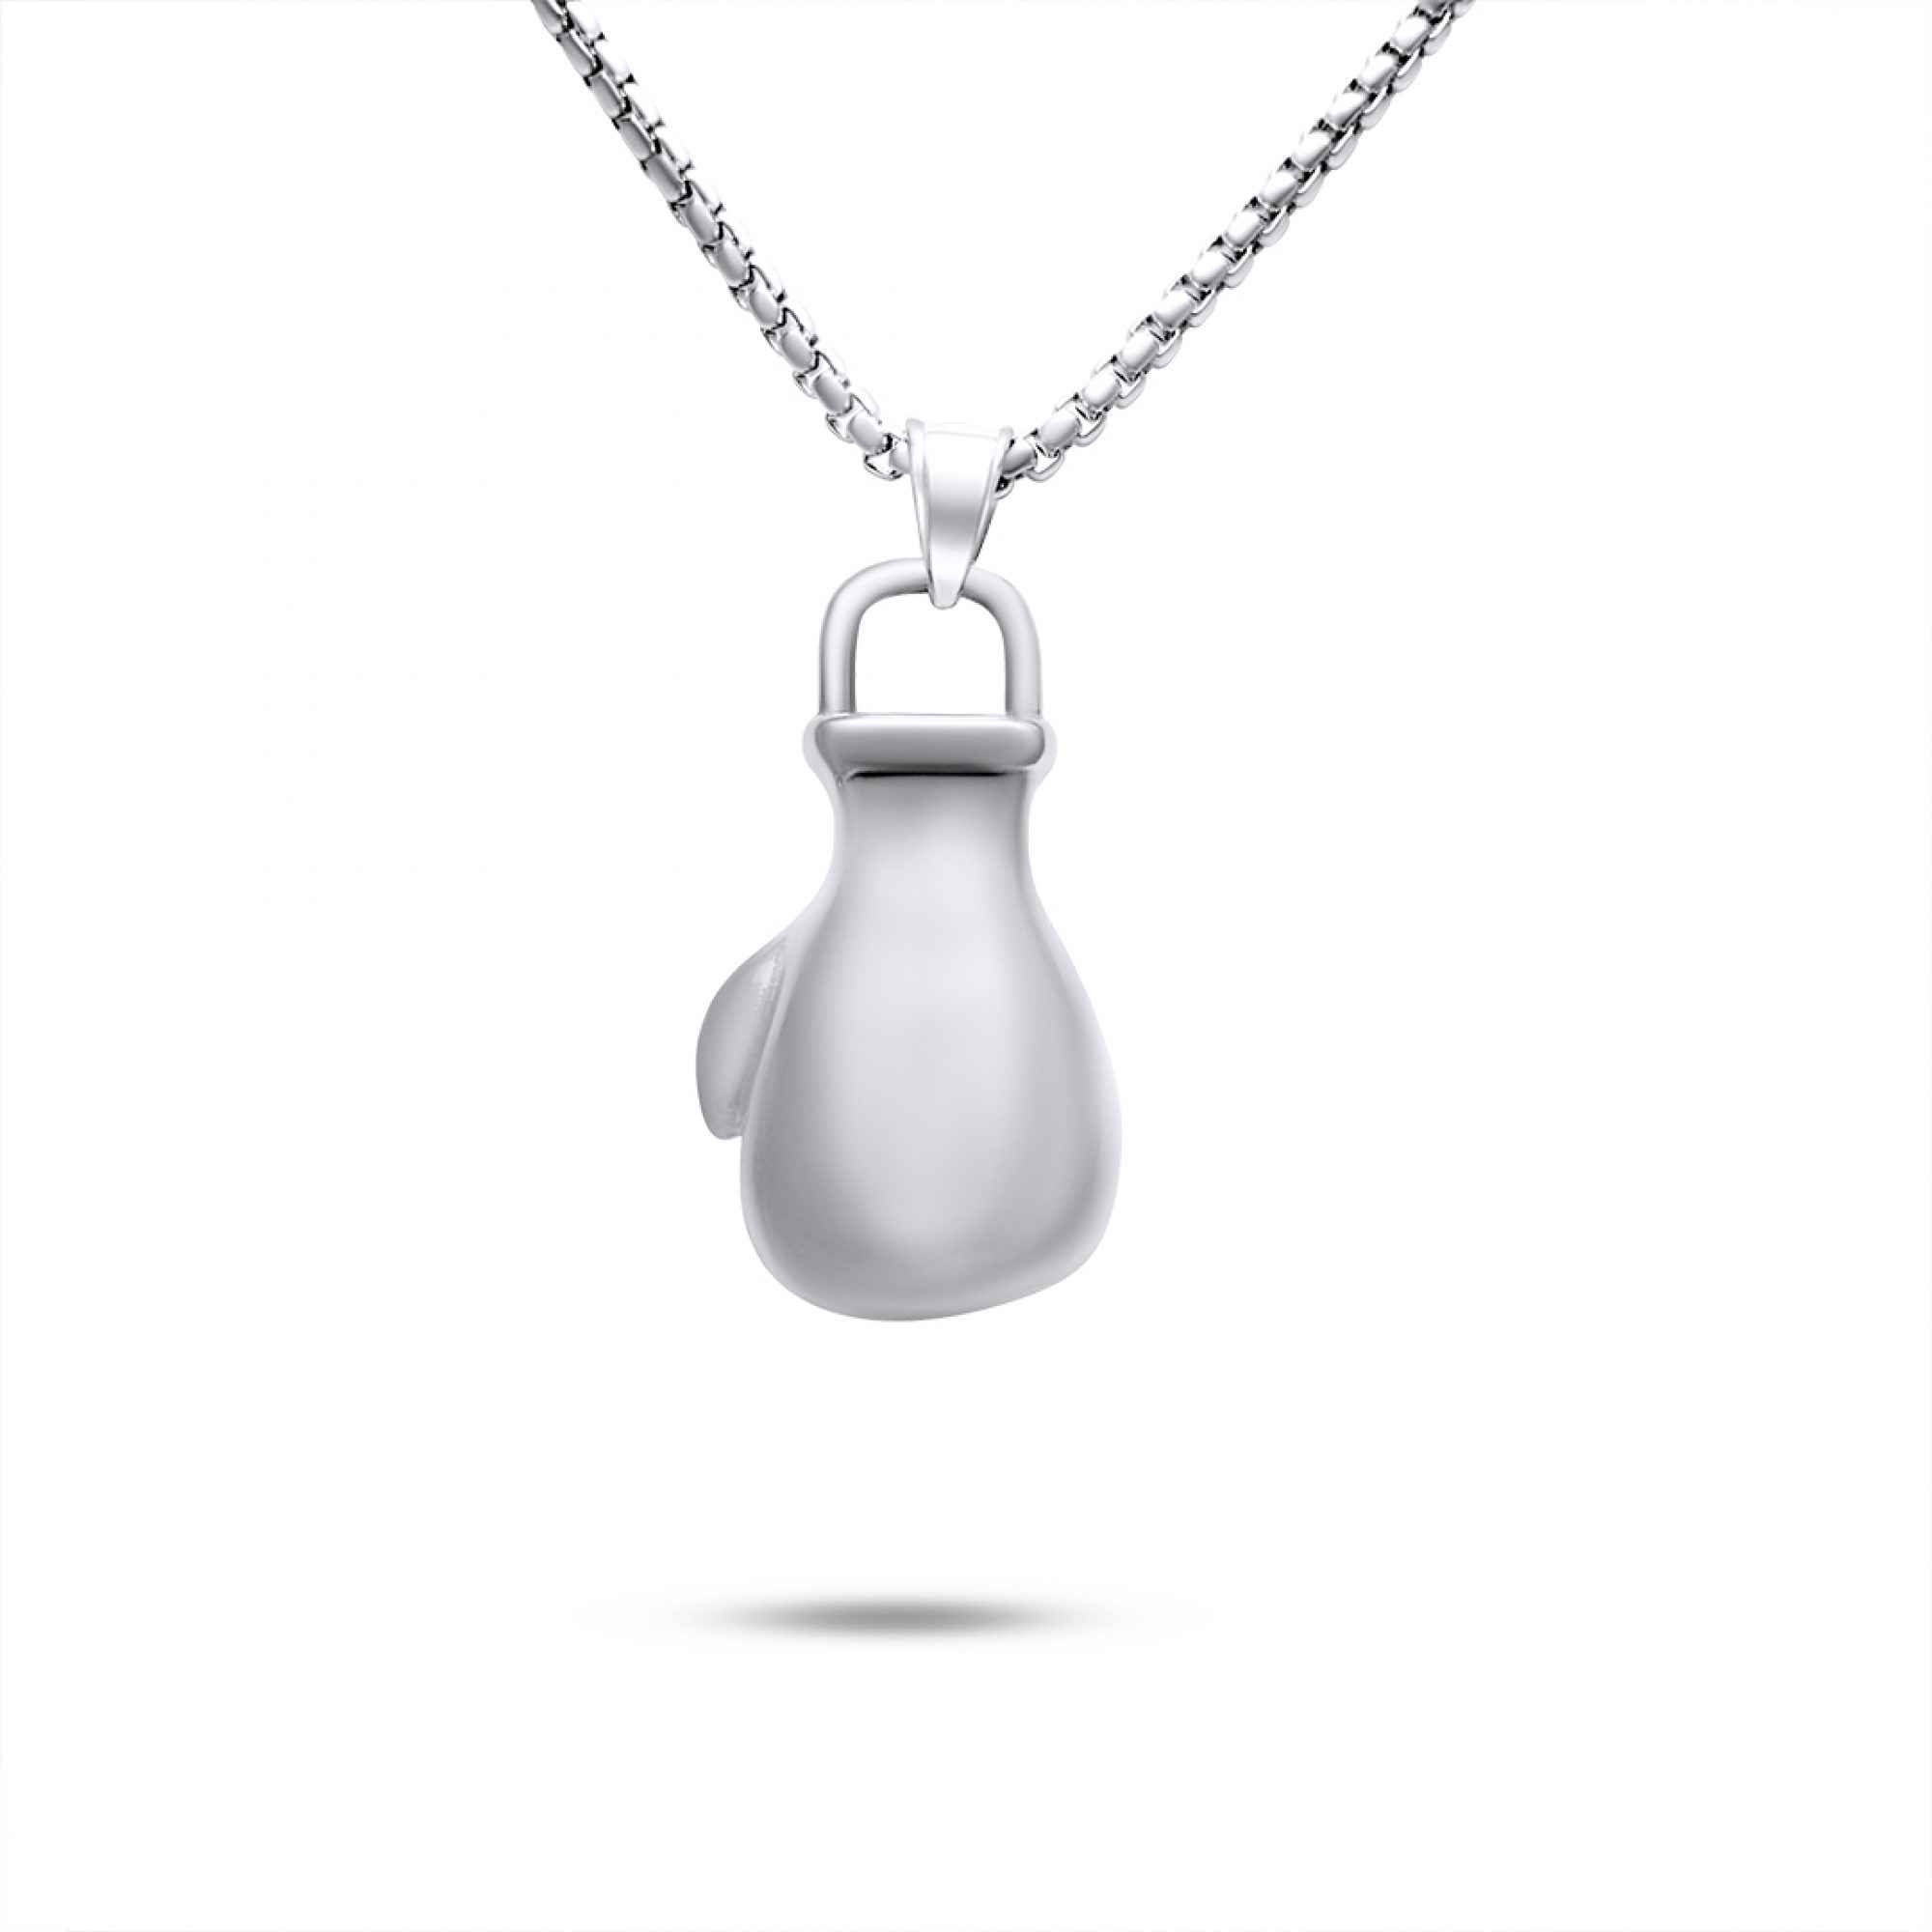 Steel boxing glove necklace